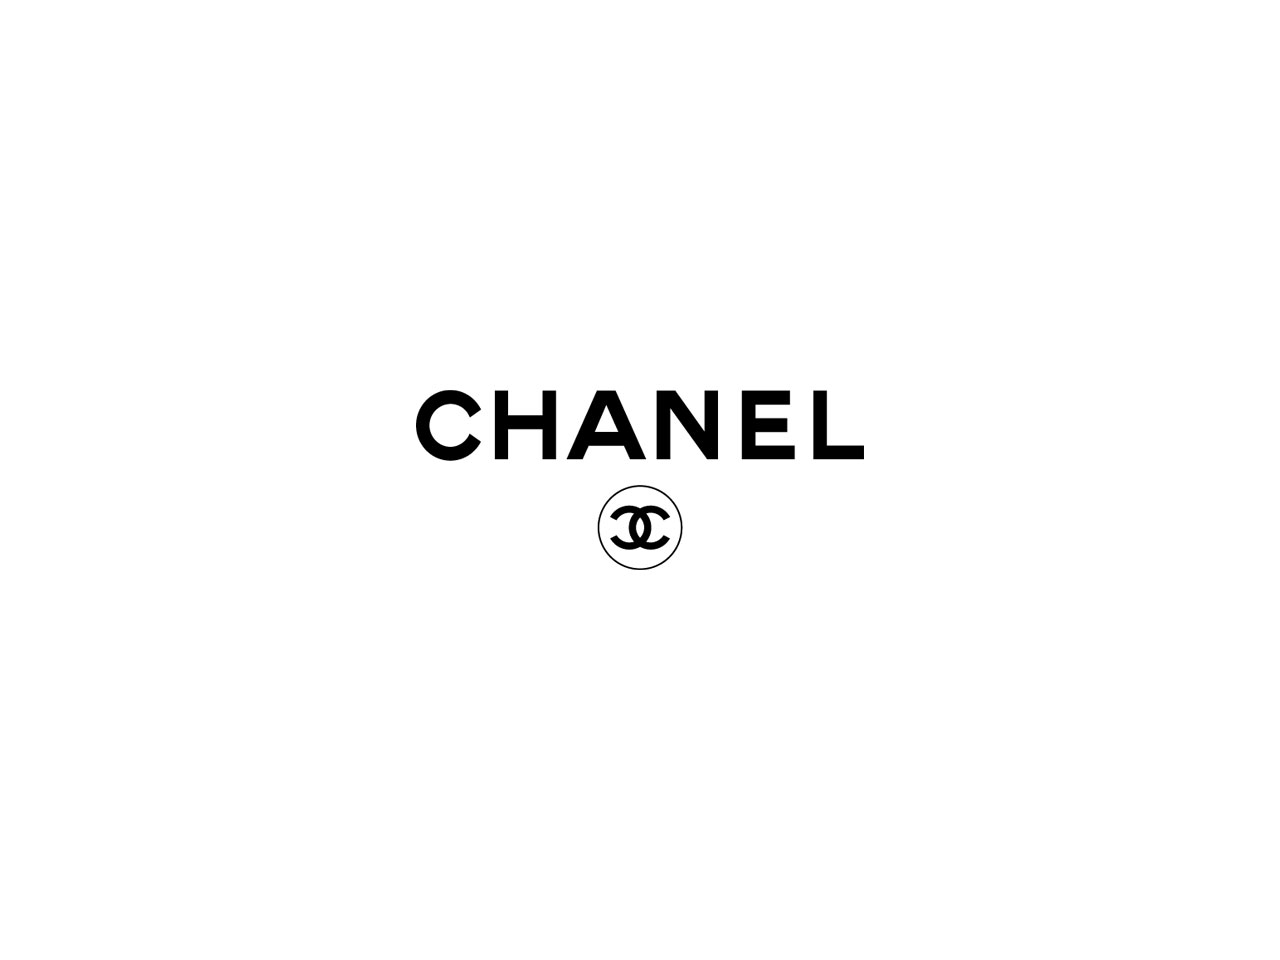 Free Download Chanel King 1280x960 For Your Desktop Mobile Tablet Explore 48 Coco Chanel Iphone Wallpaper Chanel Logo Wallpaper Coco Chanel Logo Wallpaper Chanel Wallpaper For Desktop